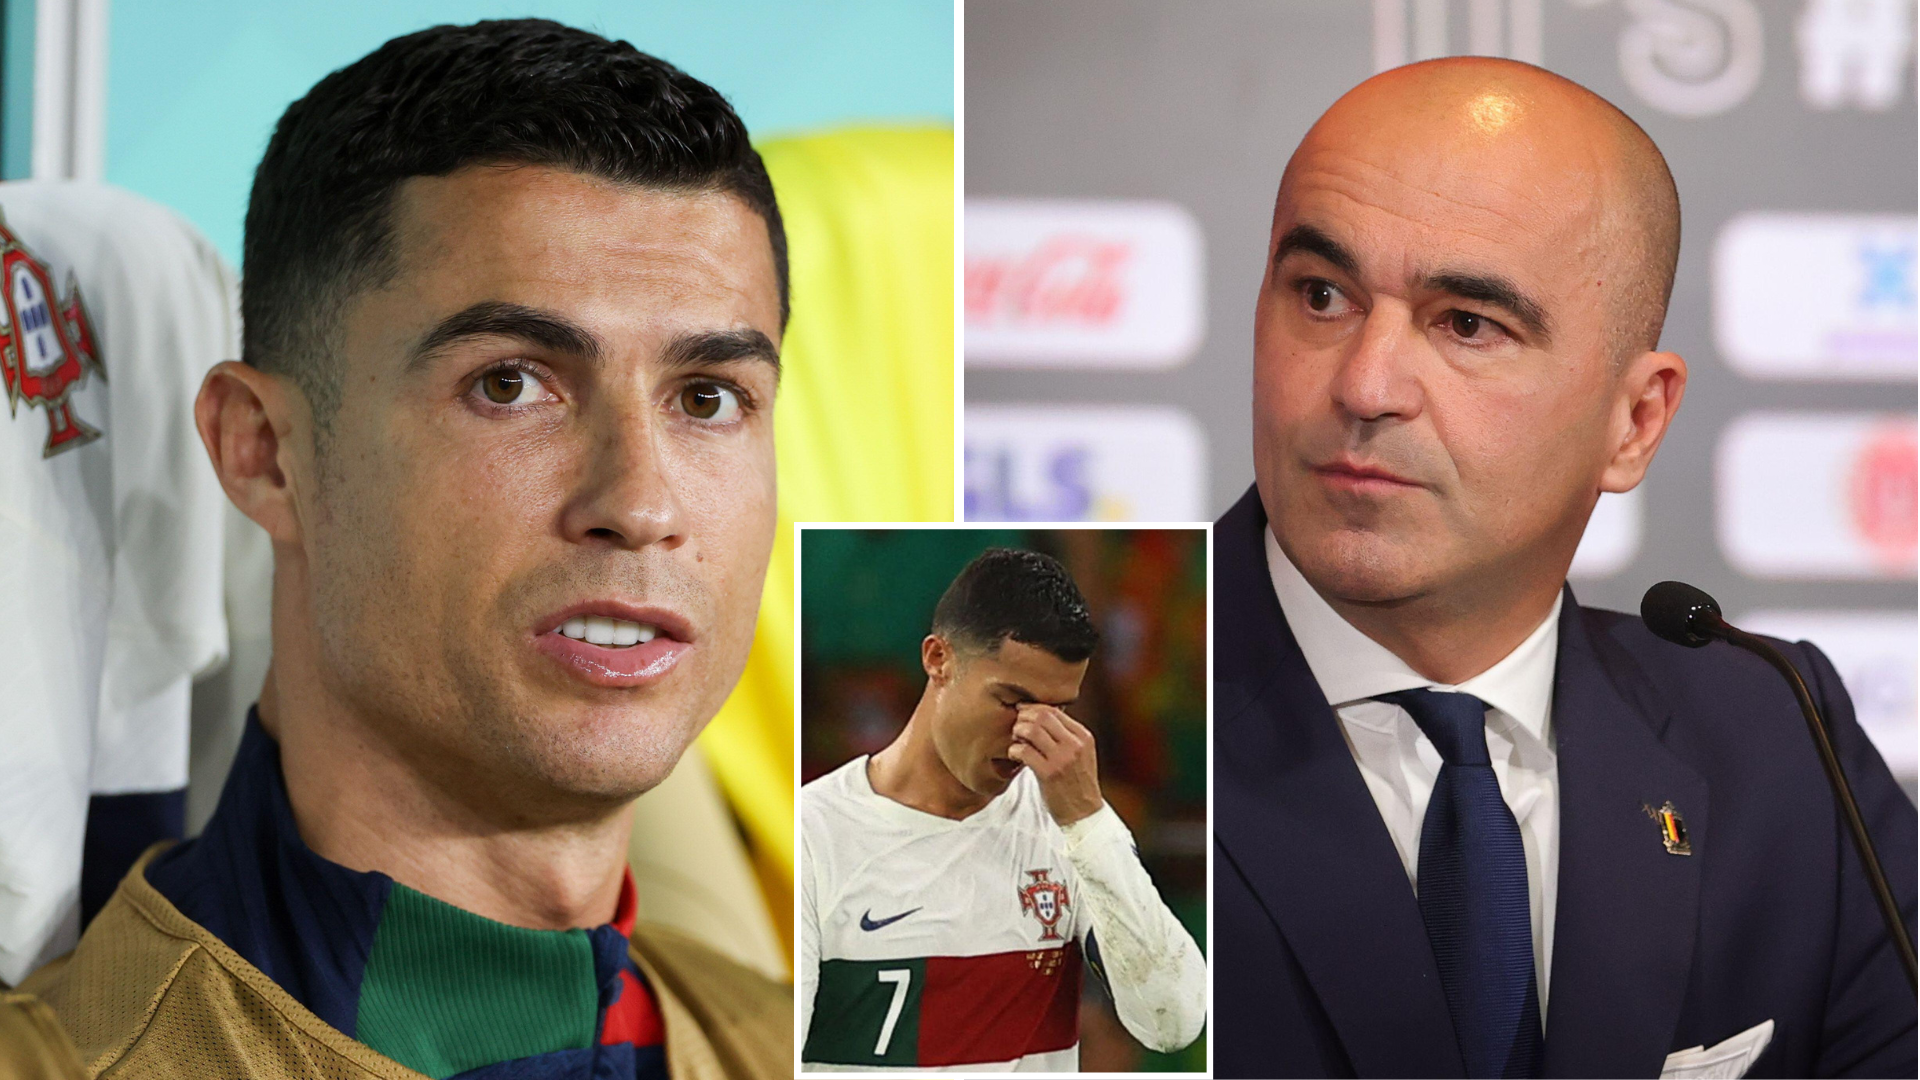 Portugal Can Win Without Ronaldo  –Martinez